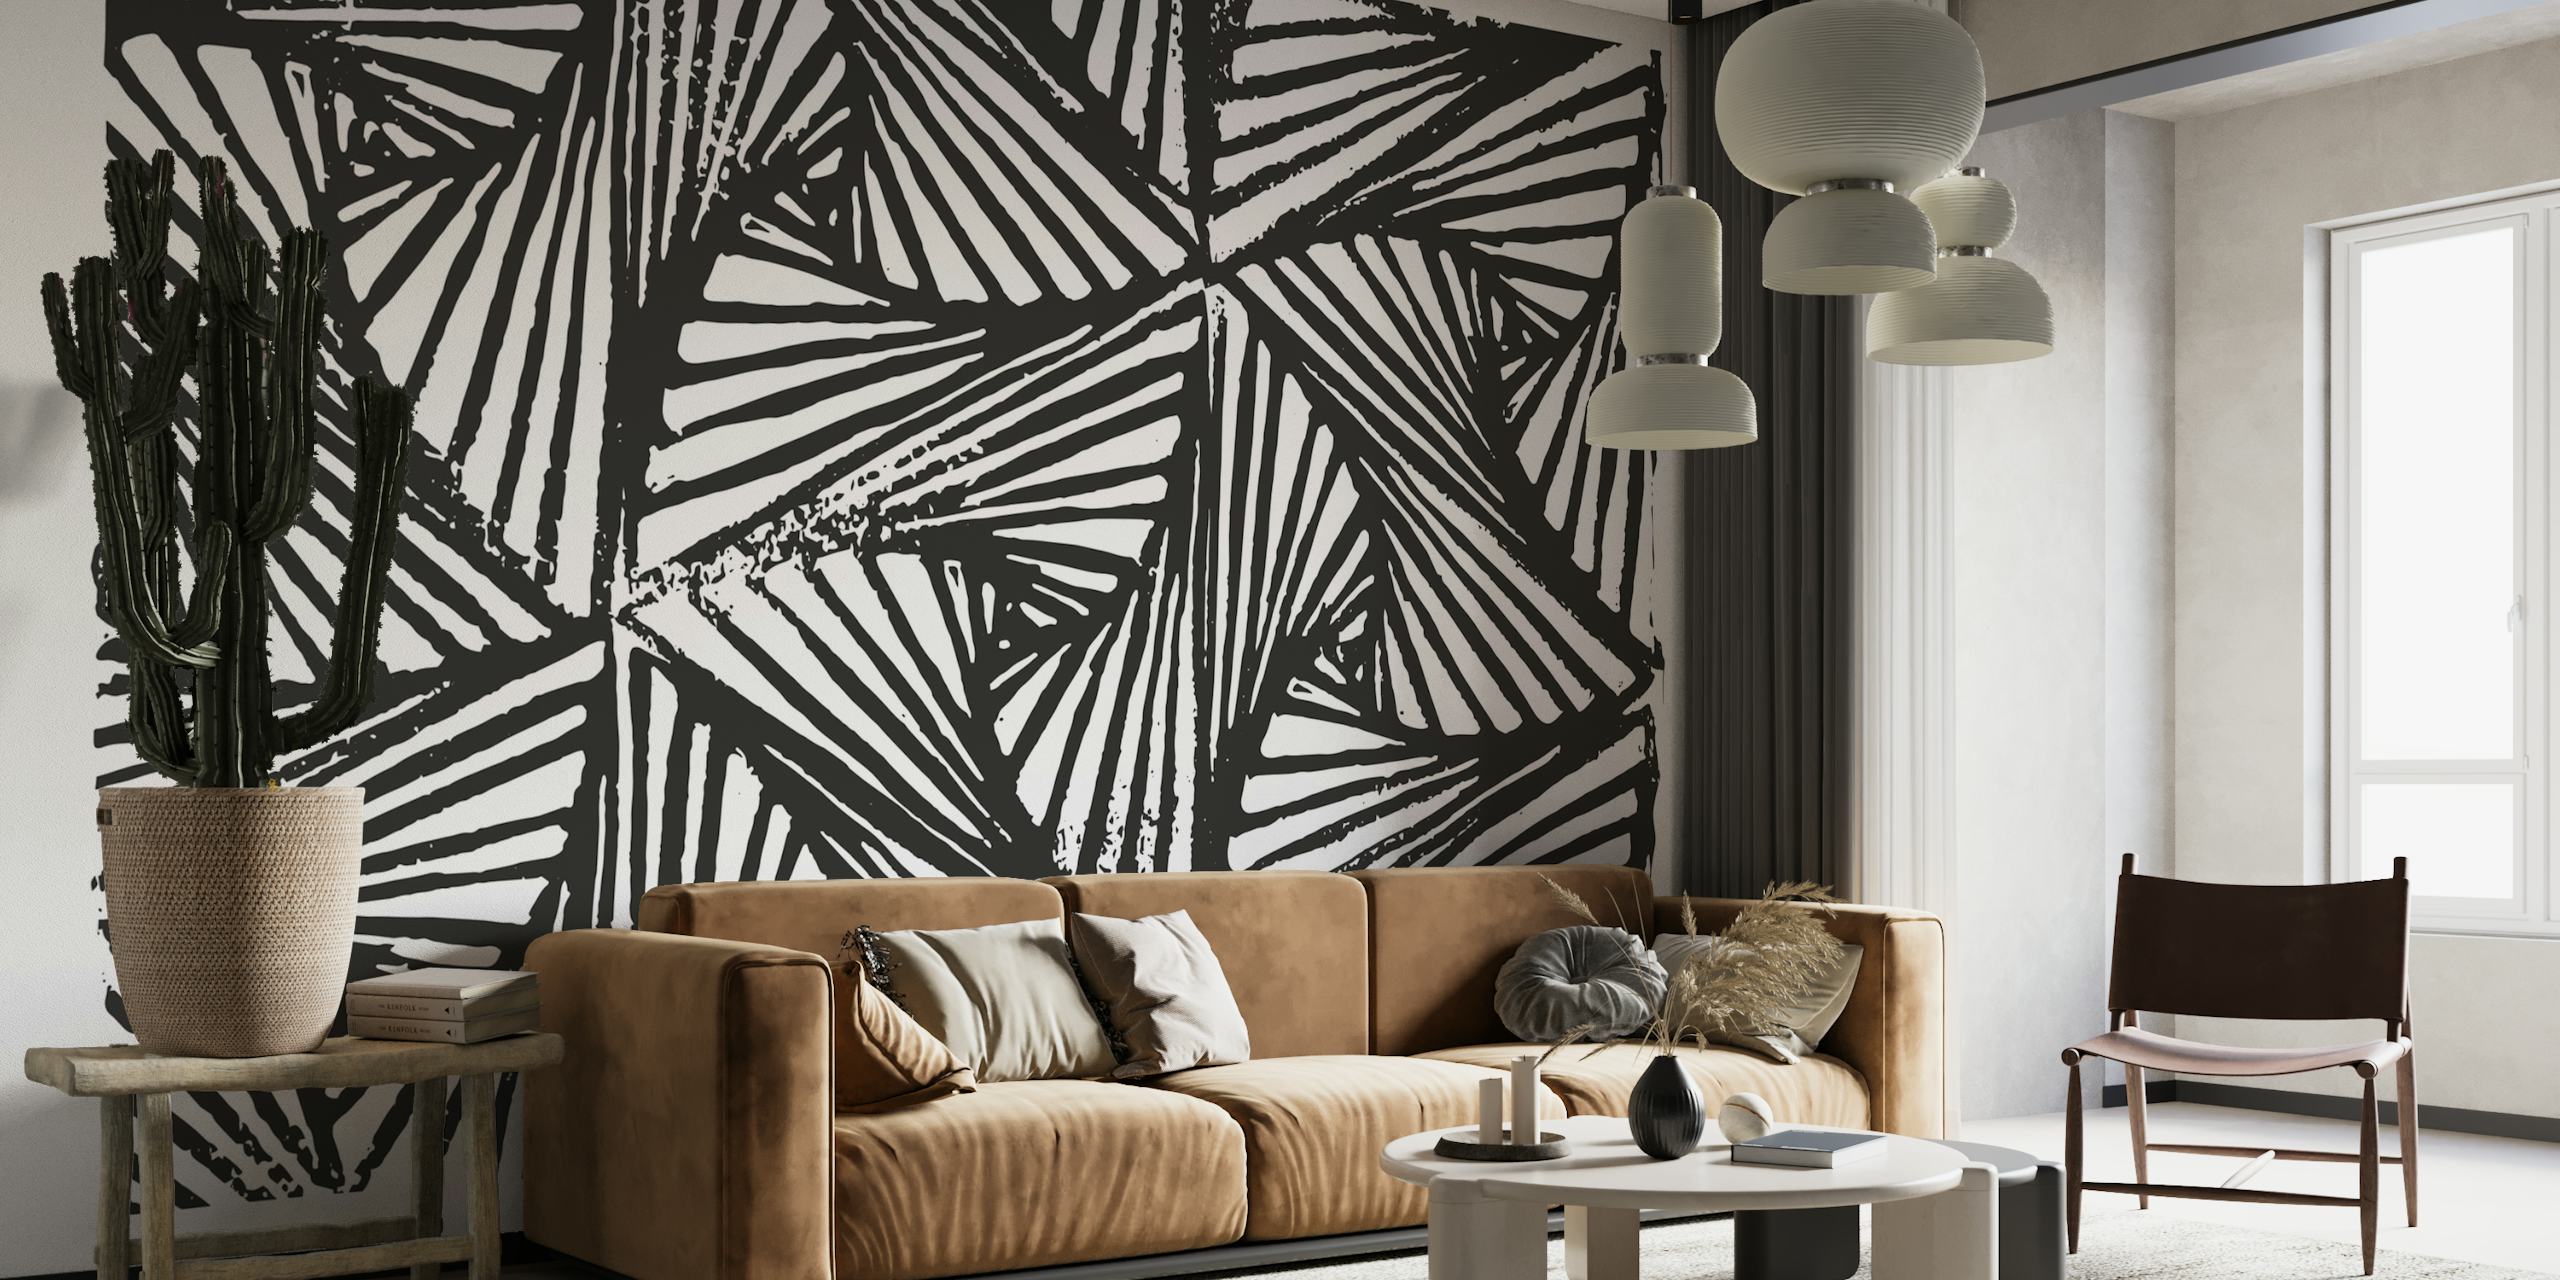 Paradox Triangle geometric optical illusion wall mural in black and white